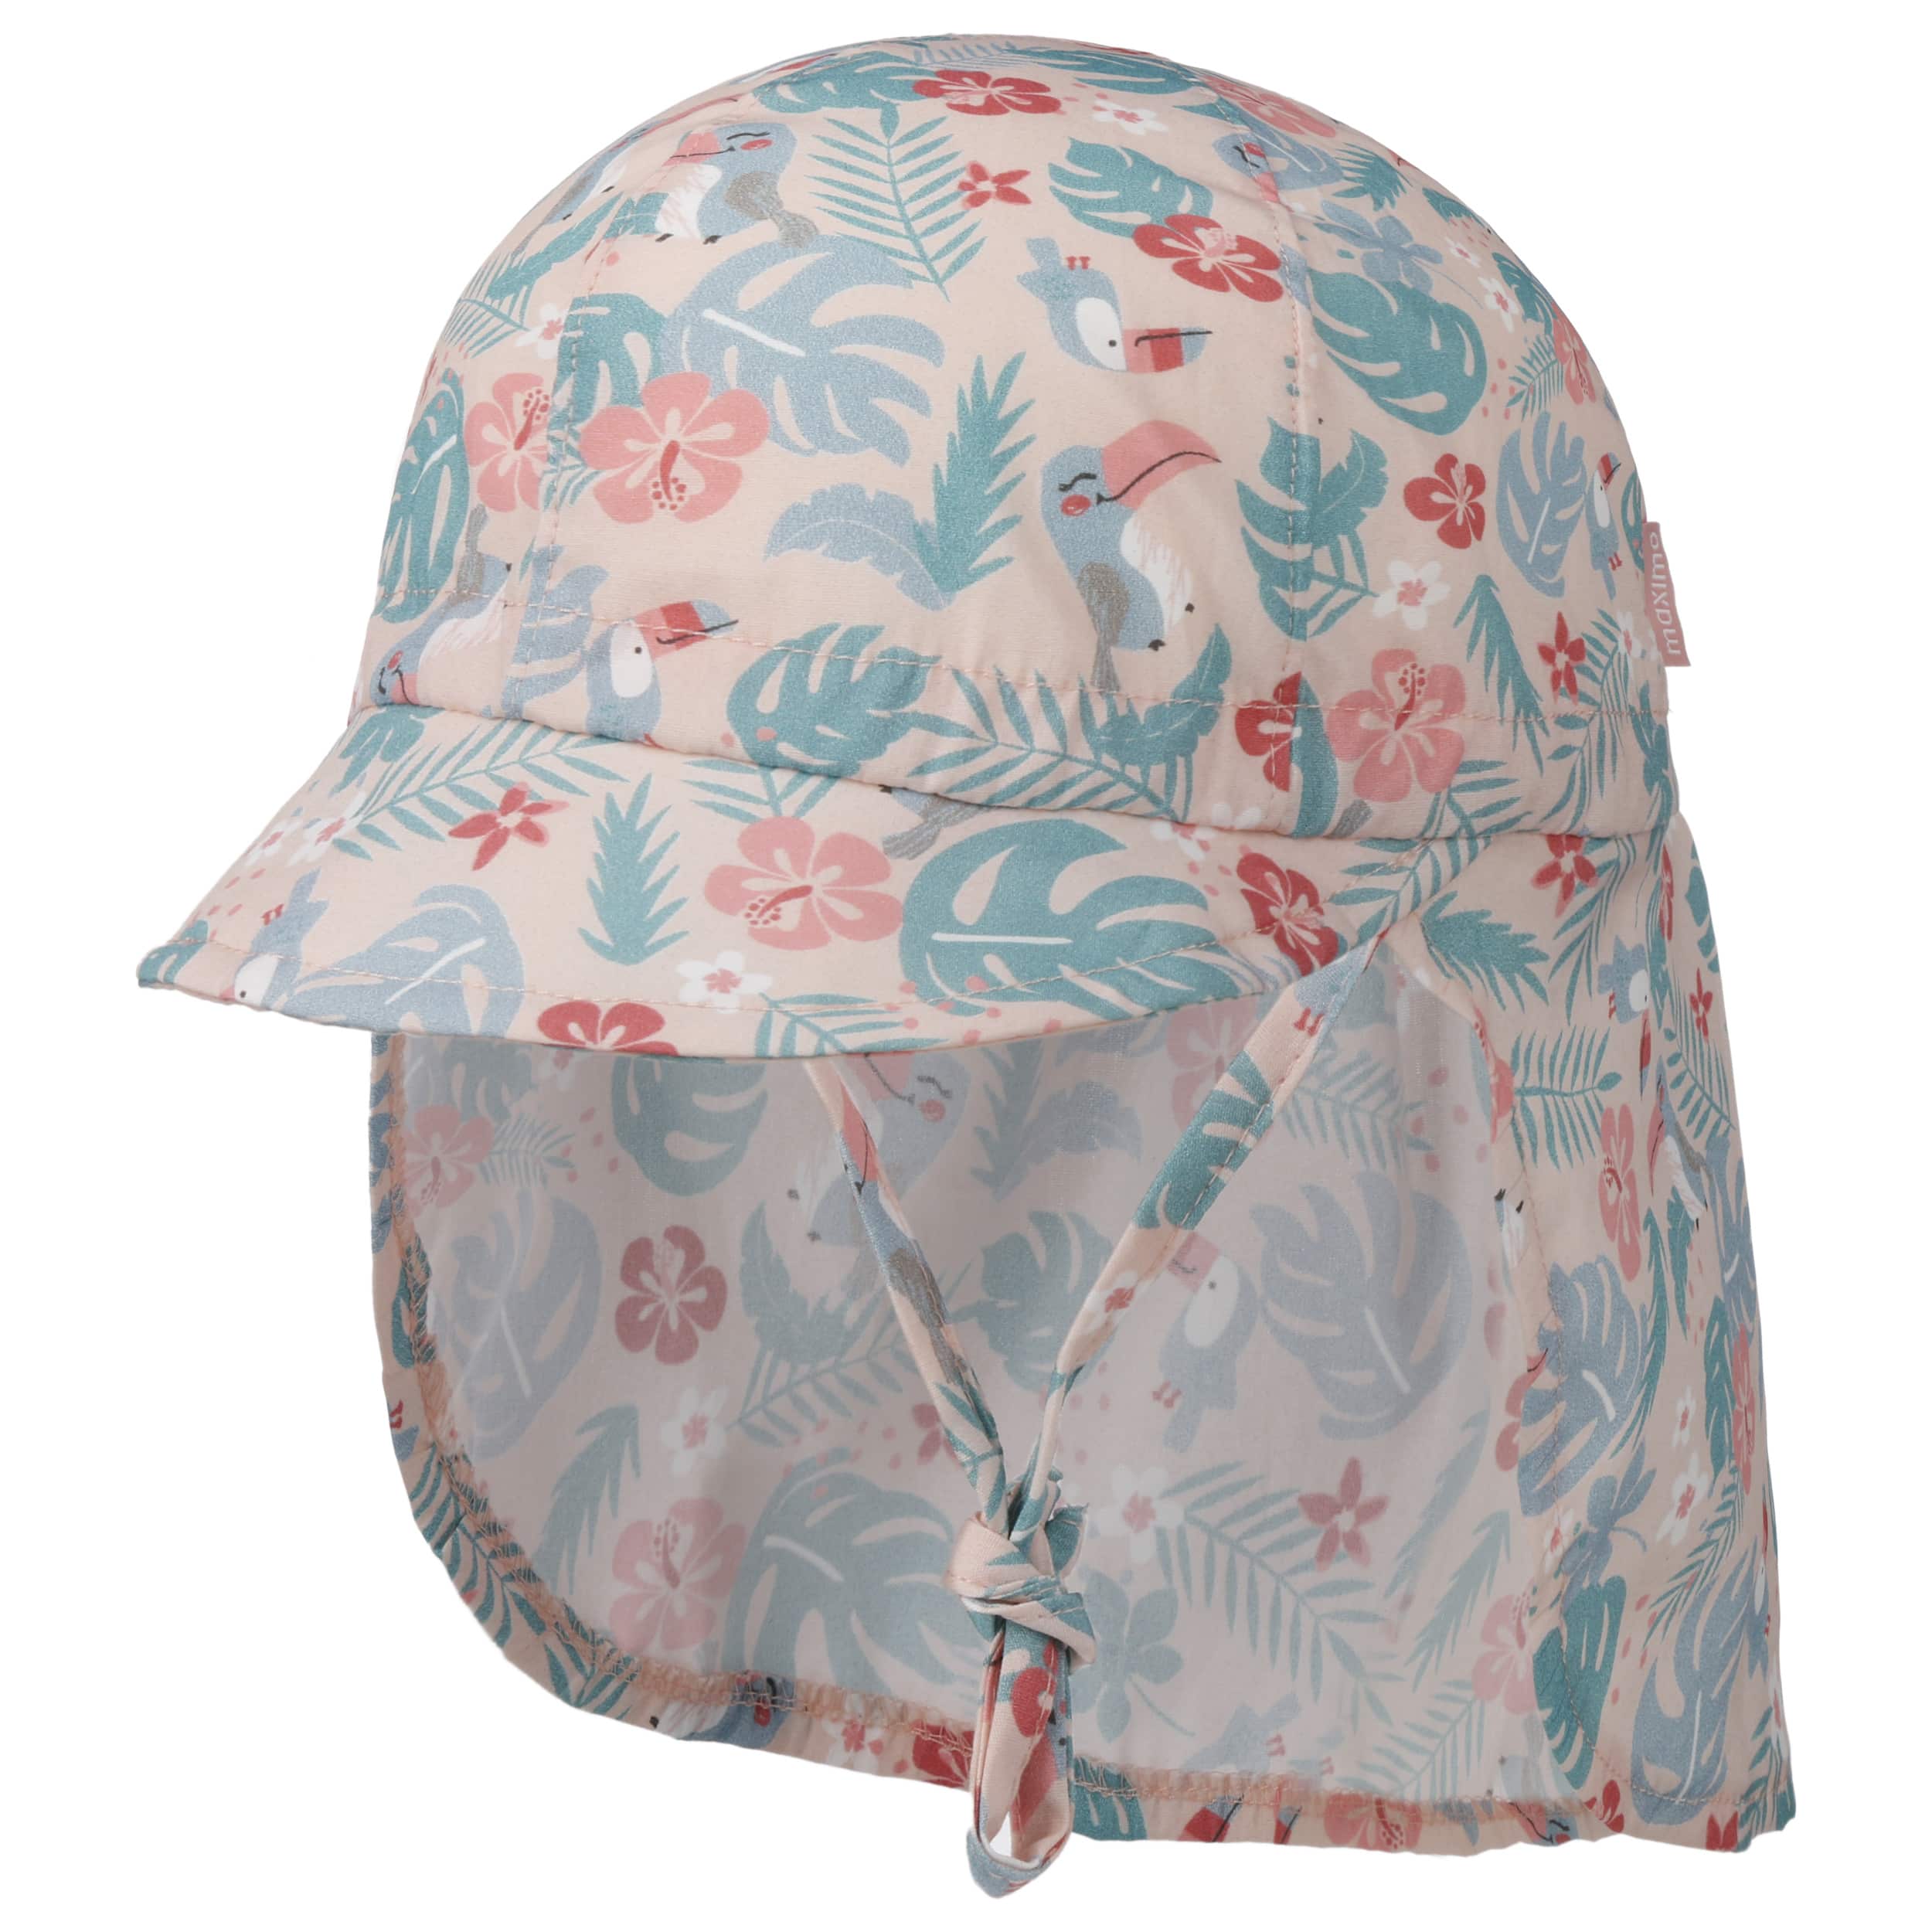 Felia Girls Cap With Neck Protection by maximo - 22,95 €